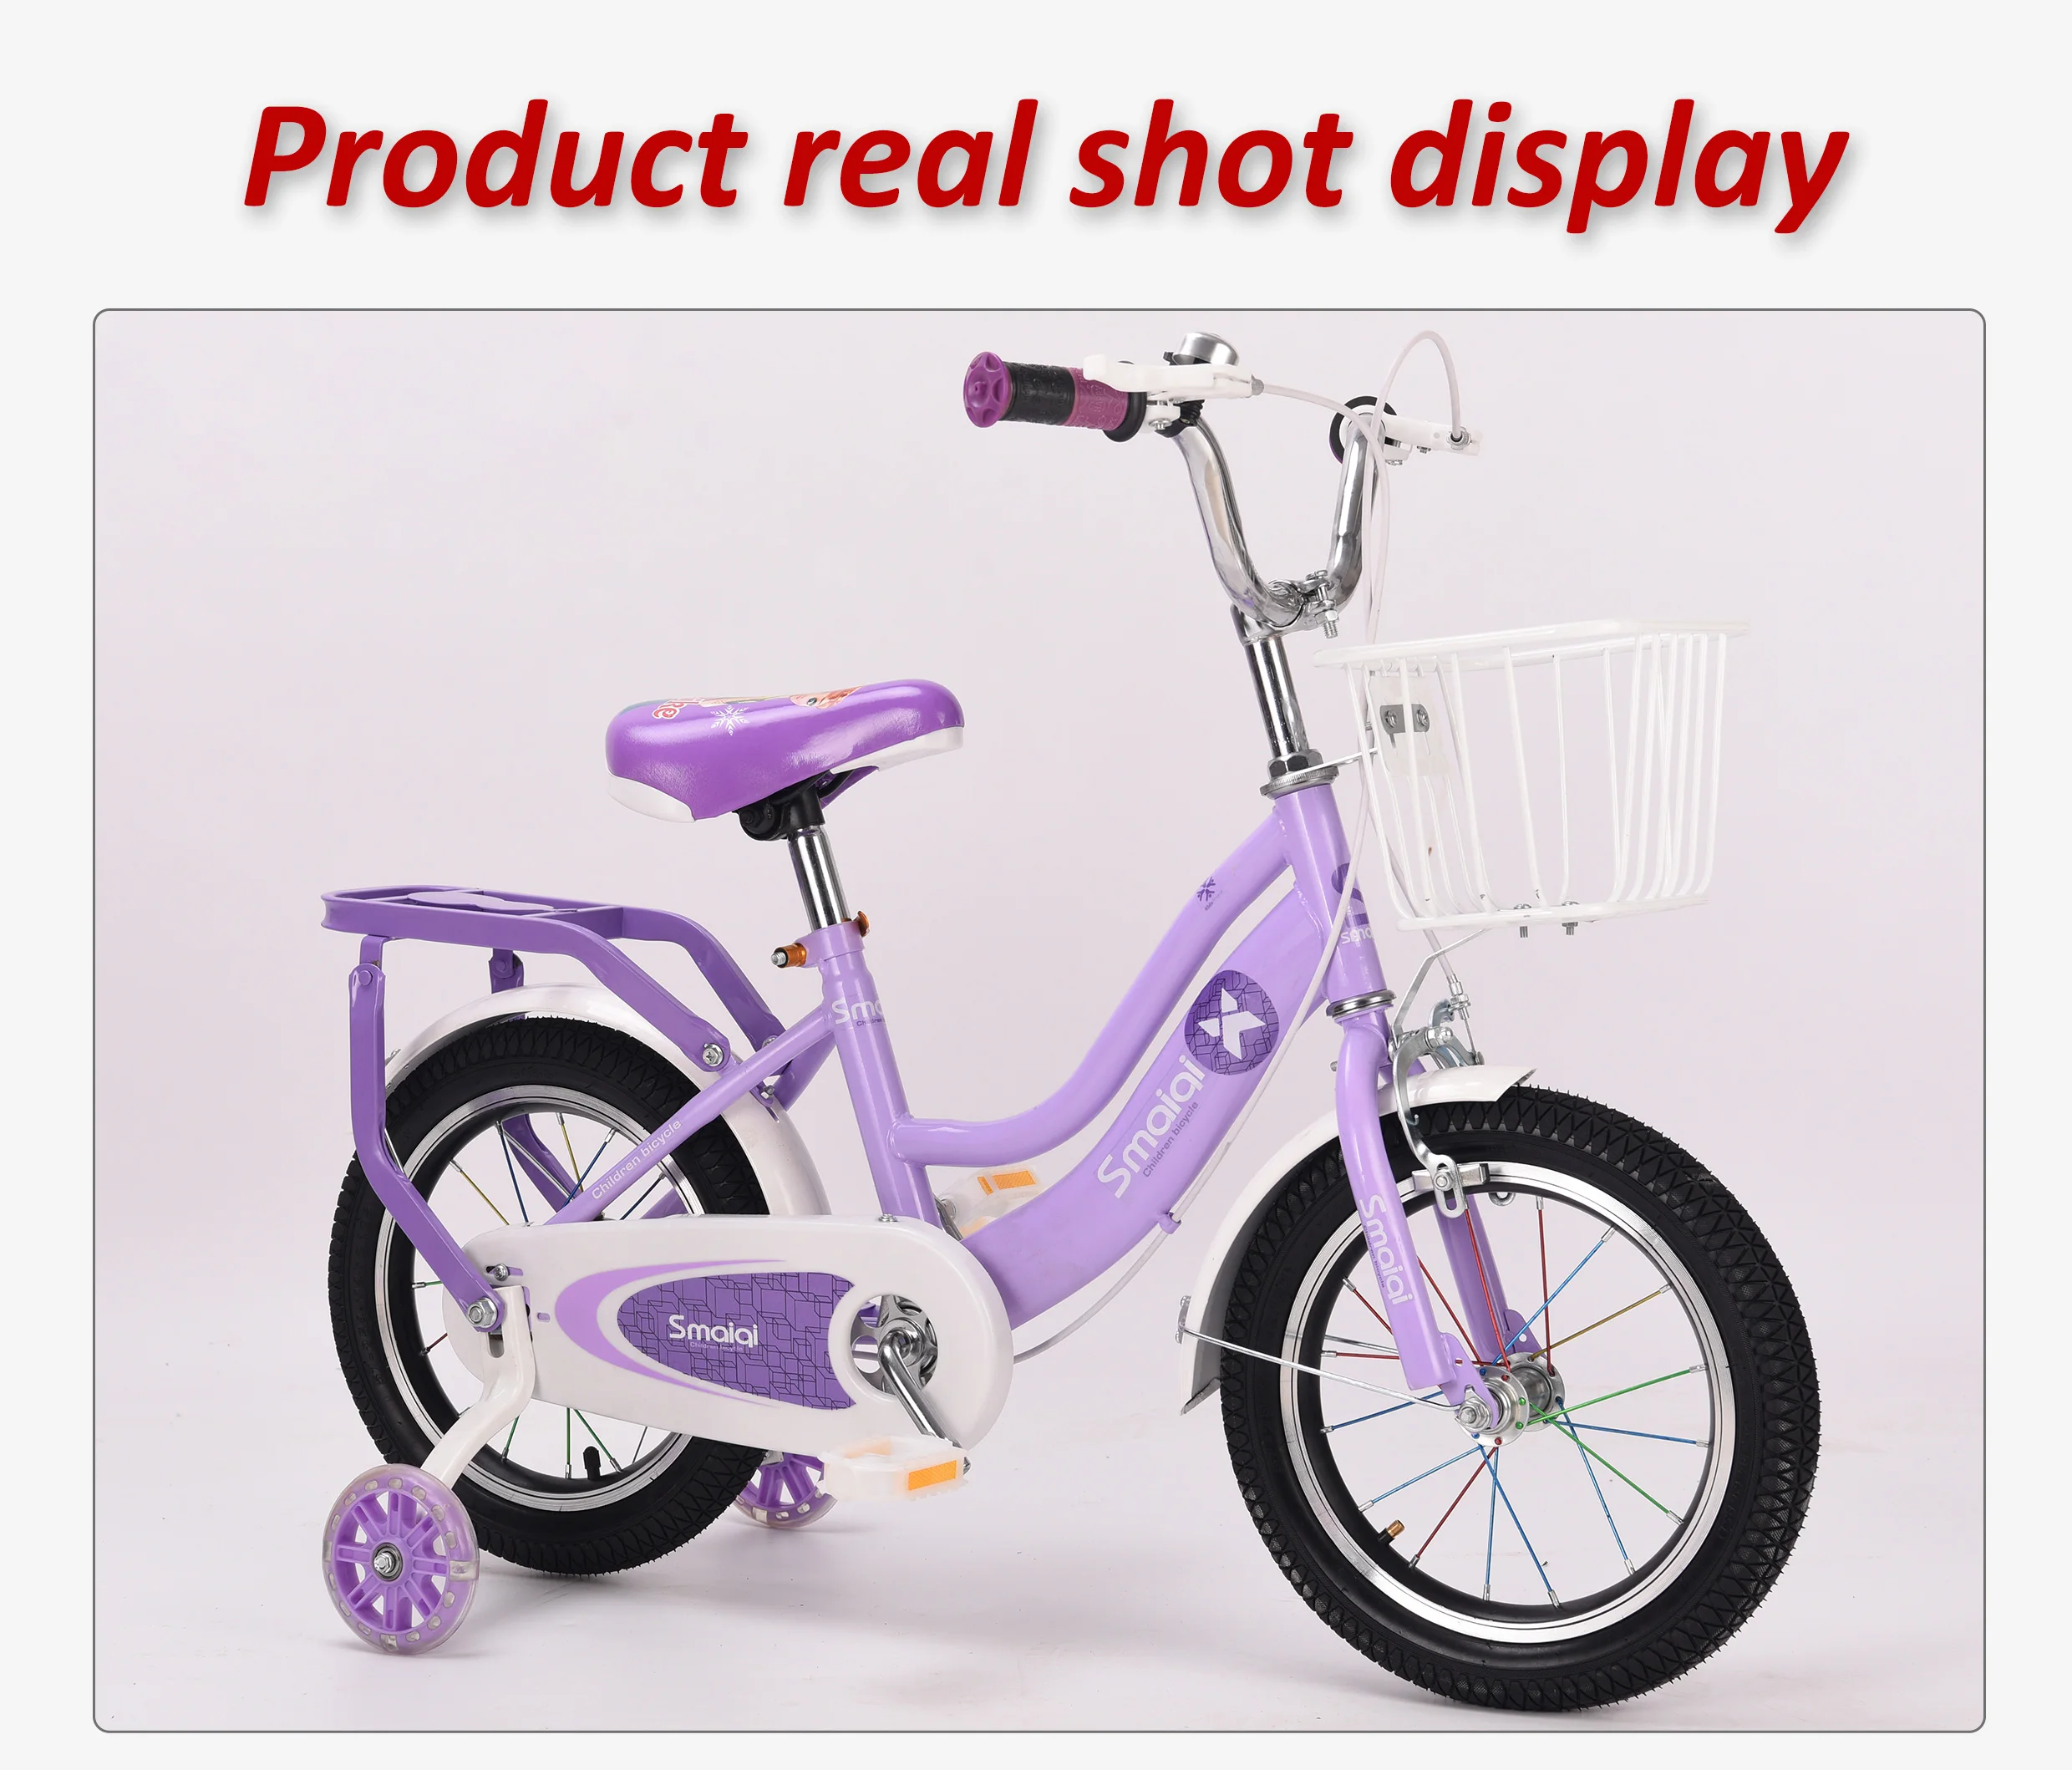 Wholesale bike sale online cheap kids bike tricycle buy bicycle china bike cycle for girls bicycle for kids 7 years From m.alibaba